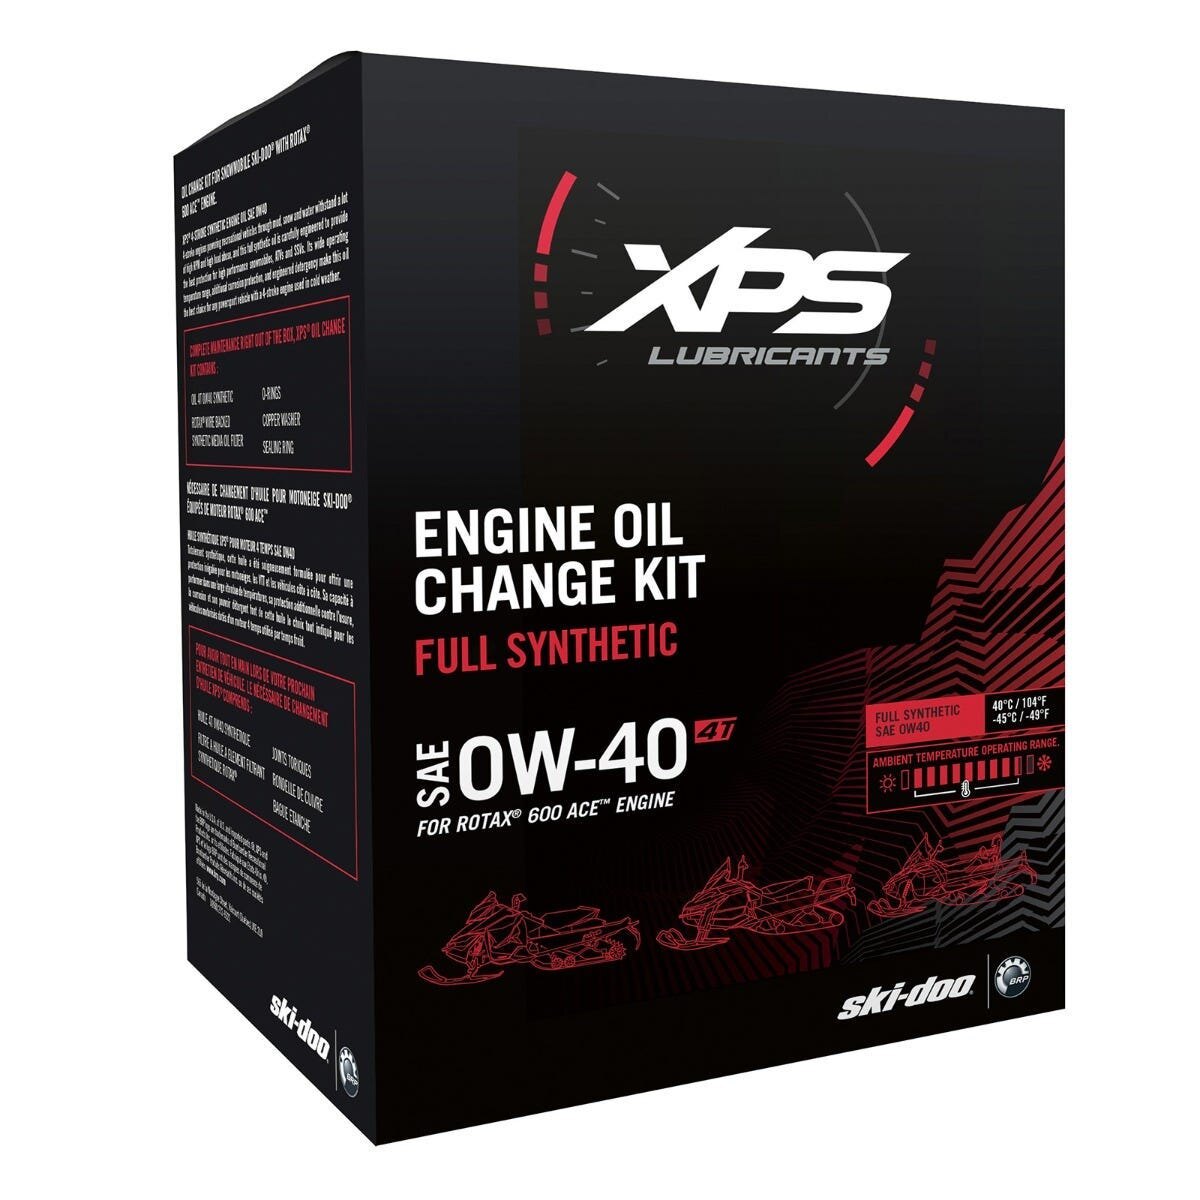 4T 0W 40 Synthetic Oil Change Kit for Rotax 1200 4 TEC engine